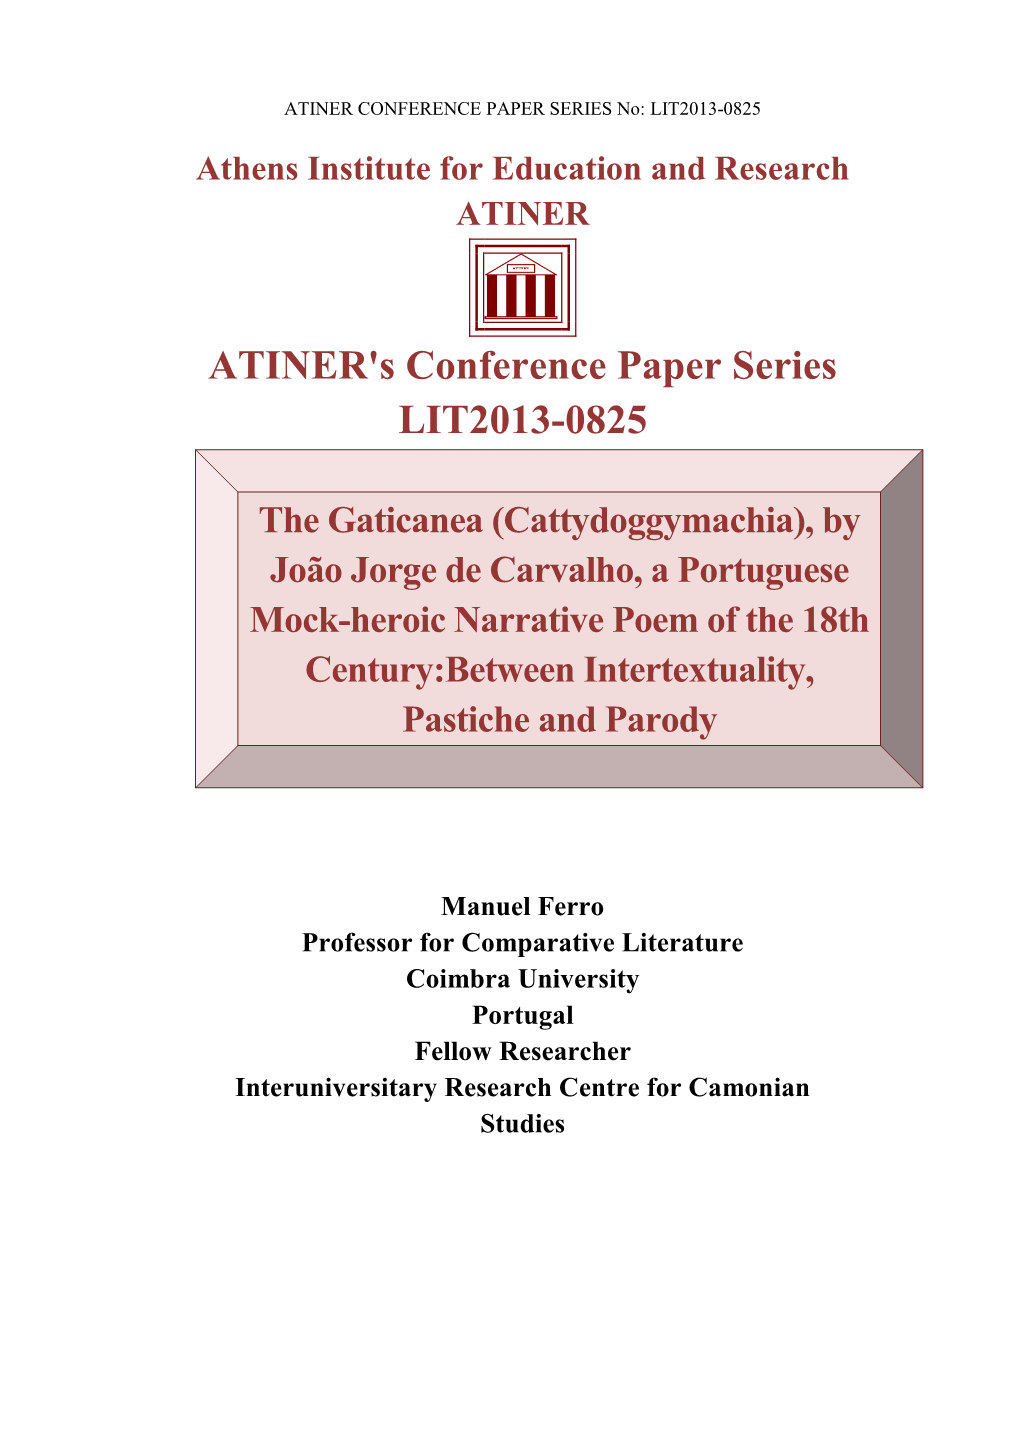 ATINER's Conference Paper Series LIT2013-0825